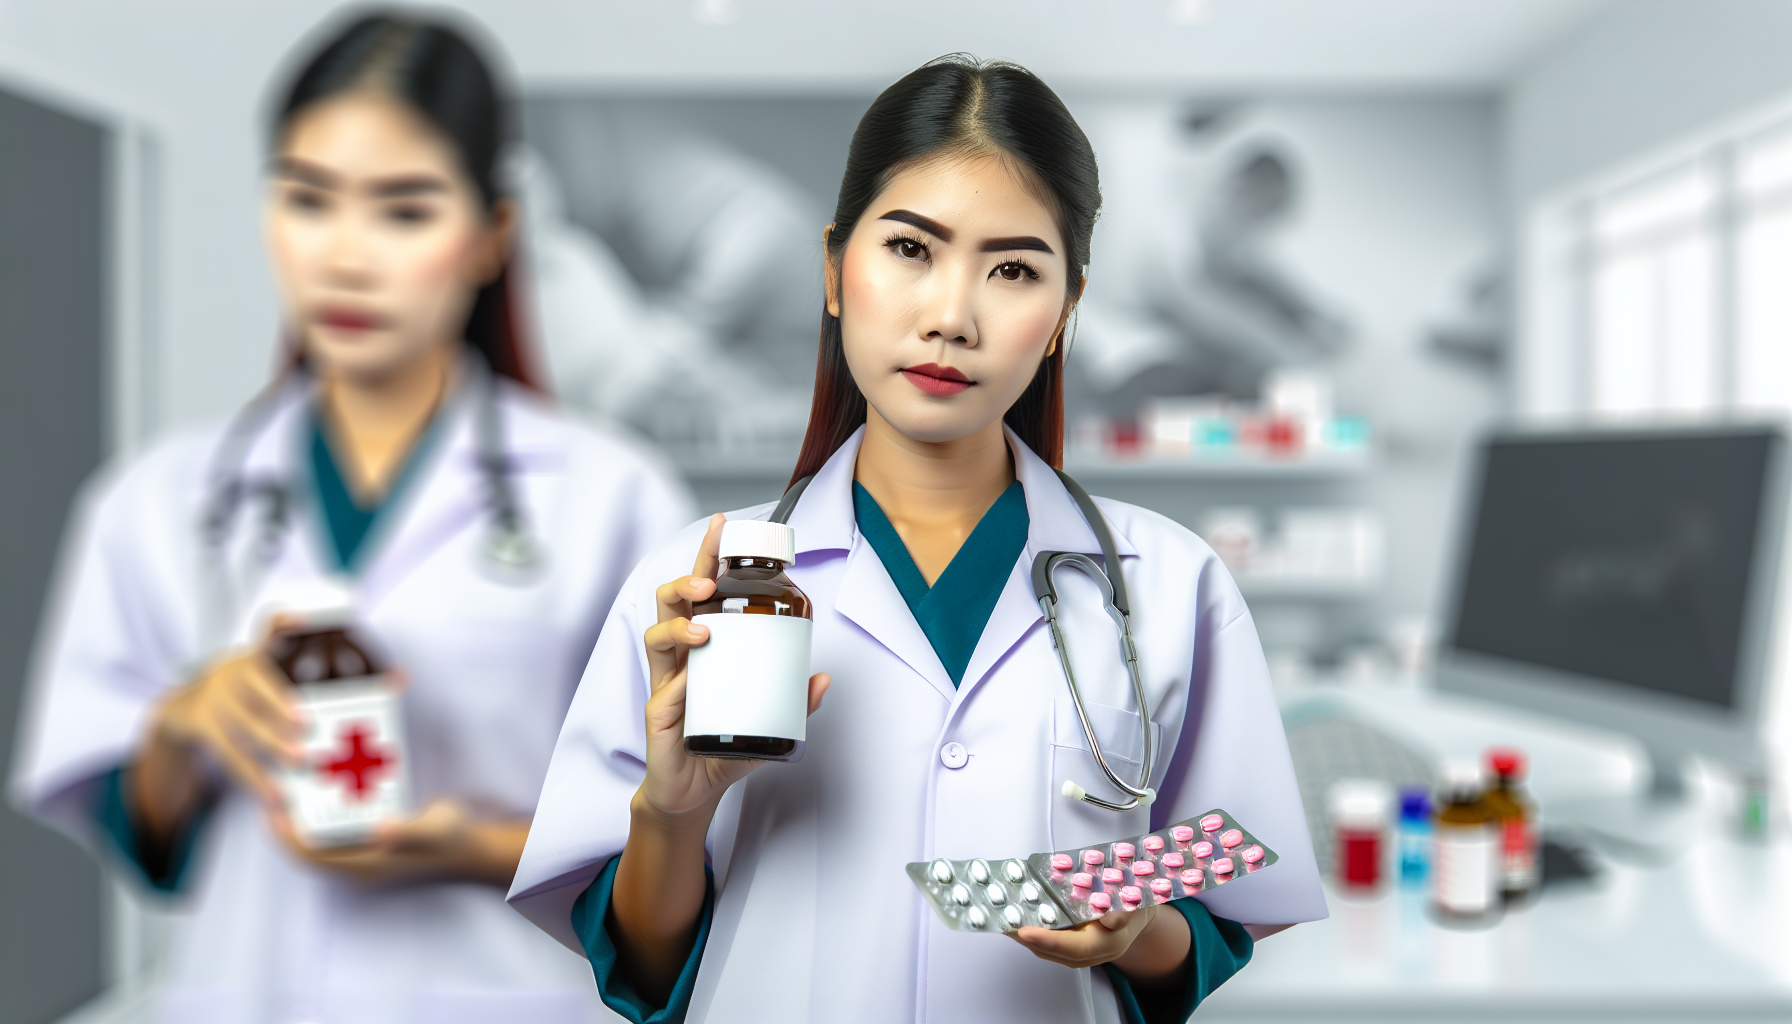 Photo of a person holding medication